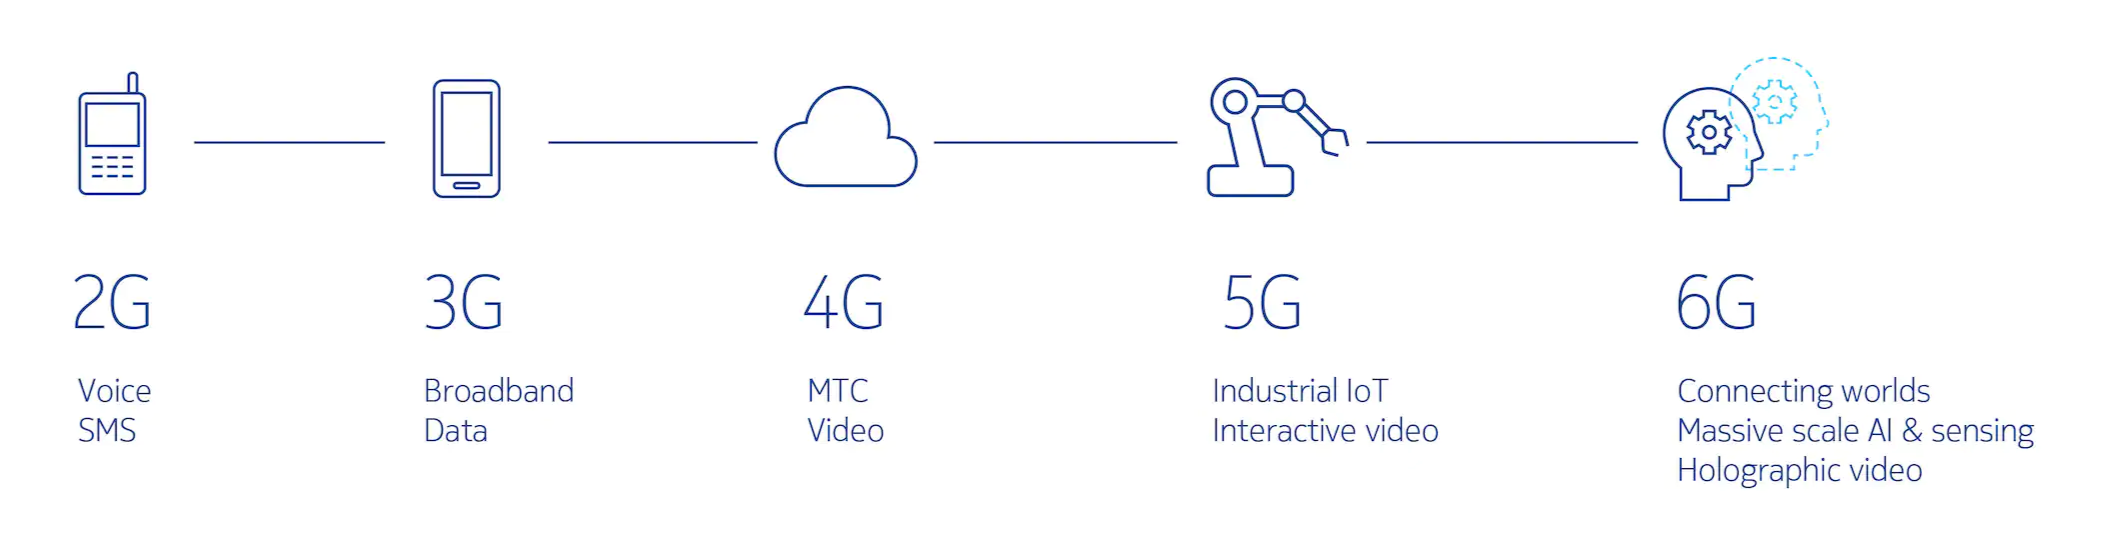 graphic showing broadband technology capabilities 2G to 6G